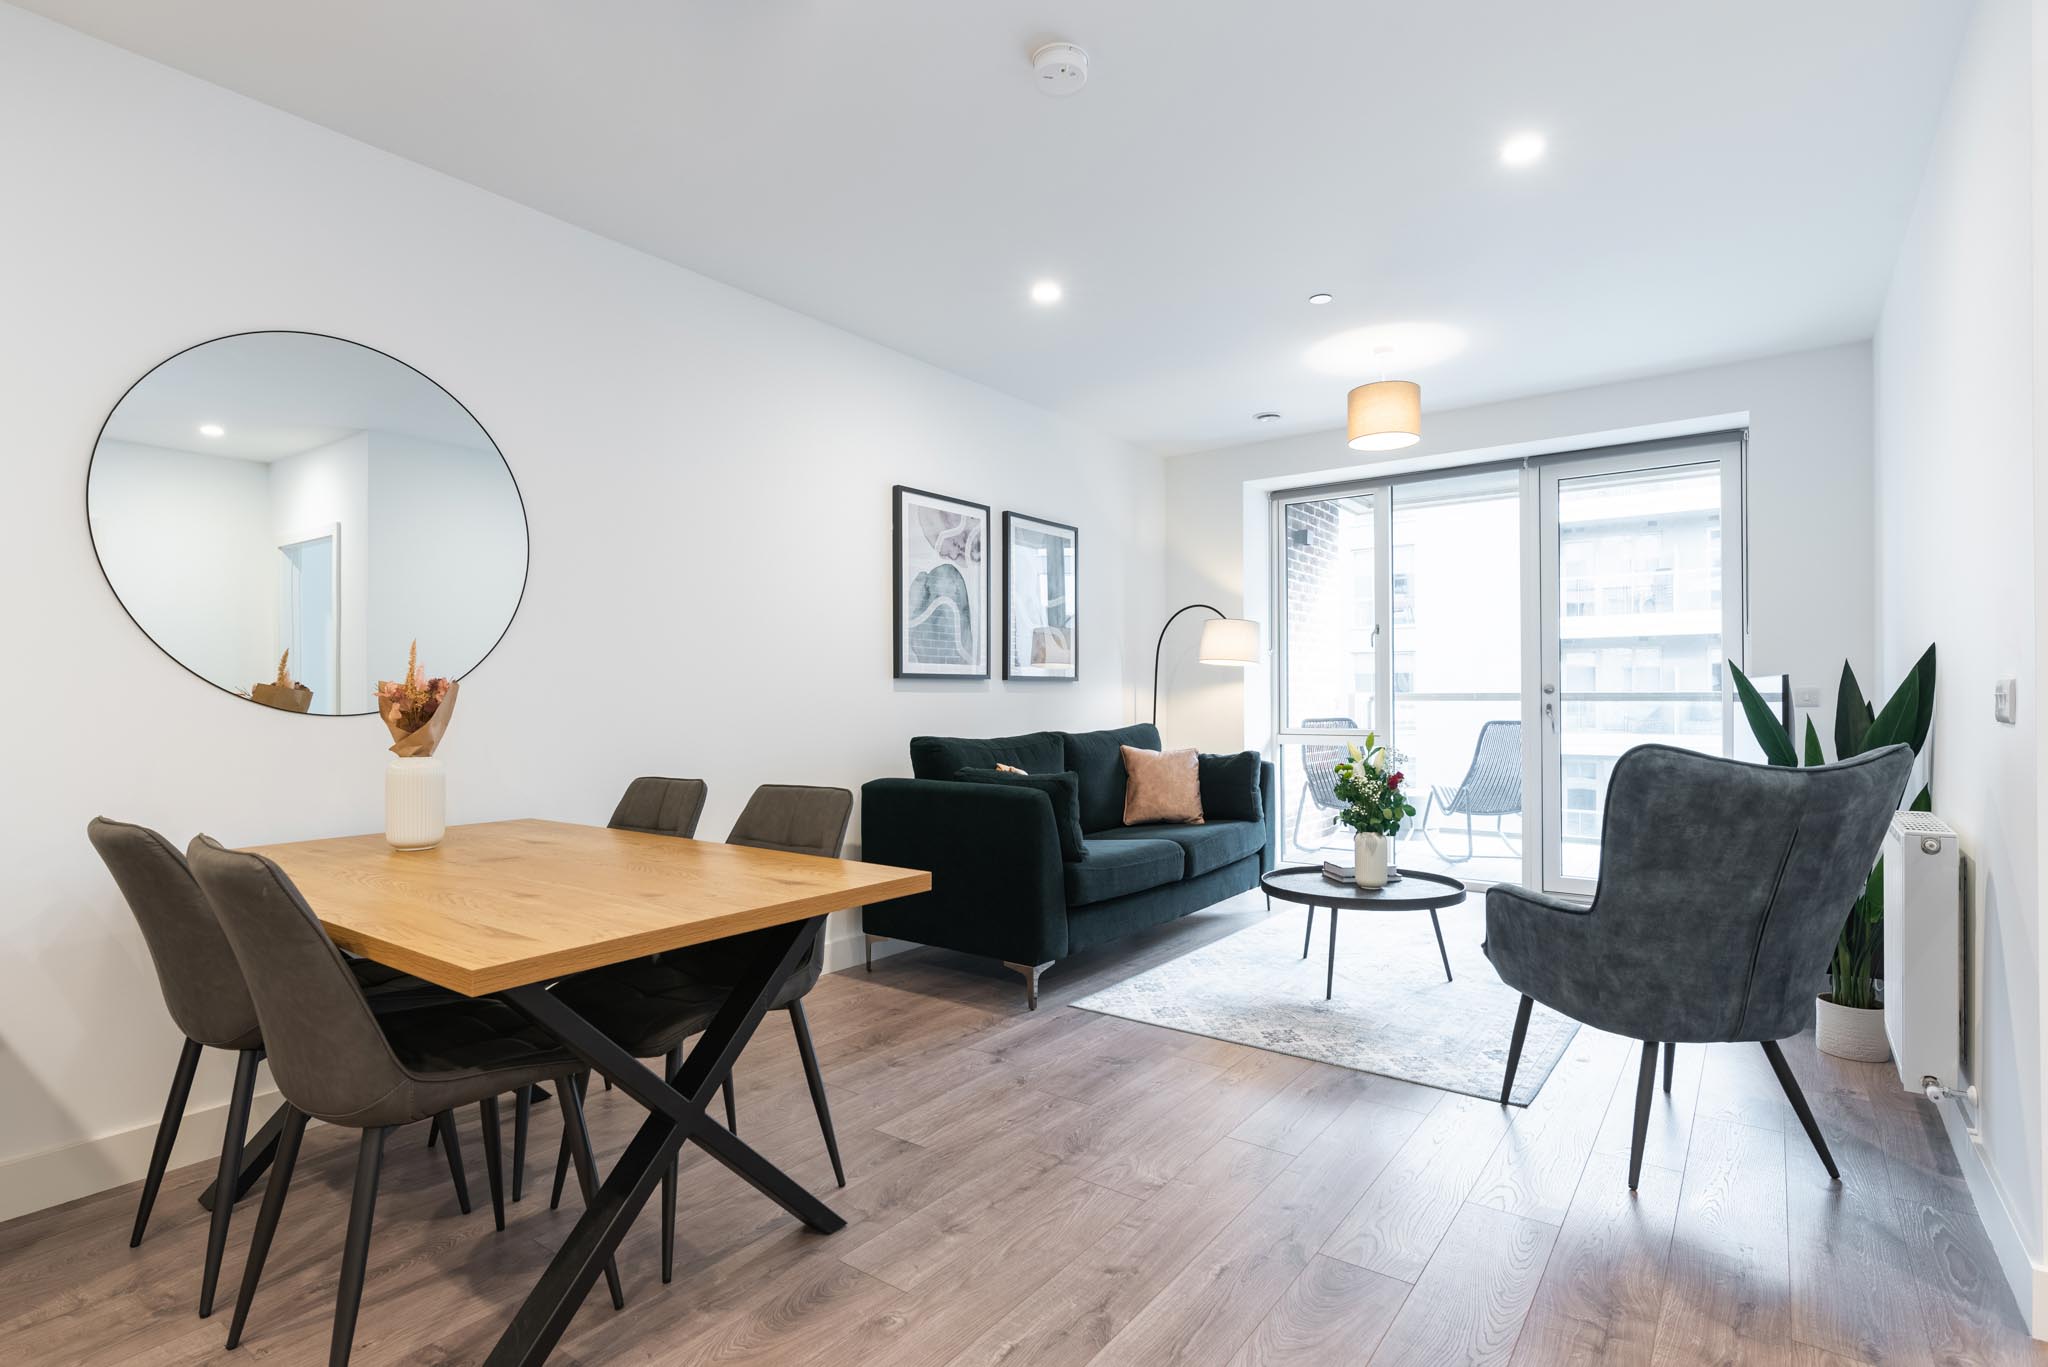 Dining and Lounge Room - One Bedroom Apartment - Urban Rest- Griffith Wood Dublin